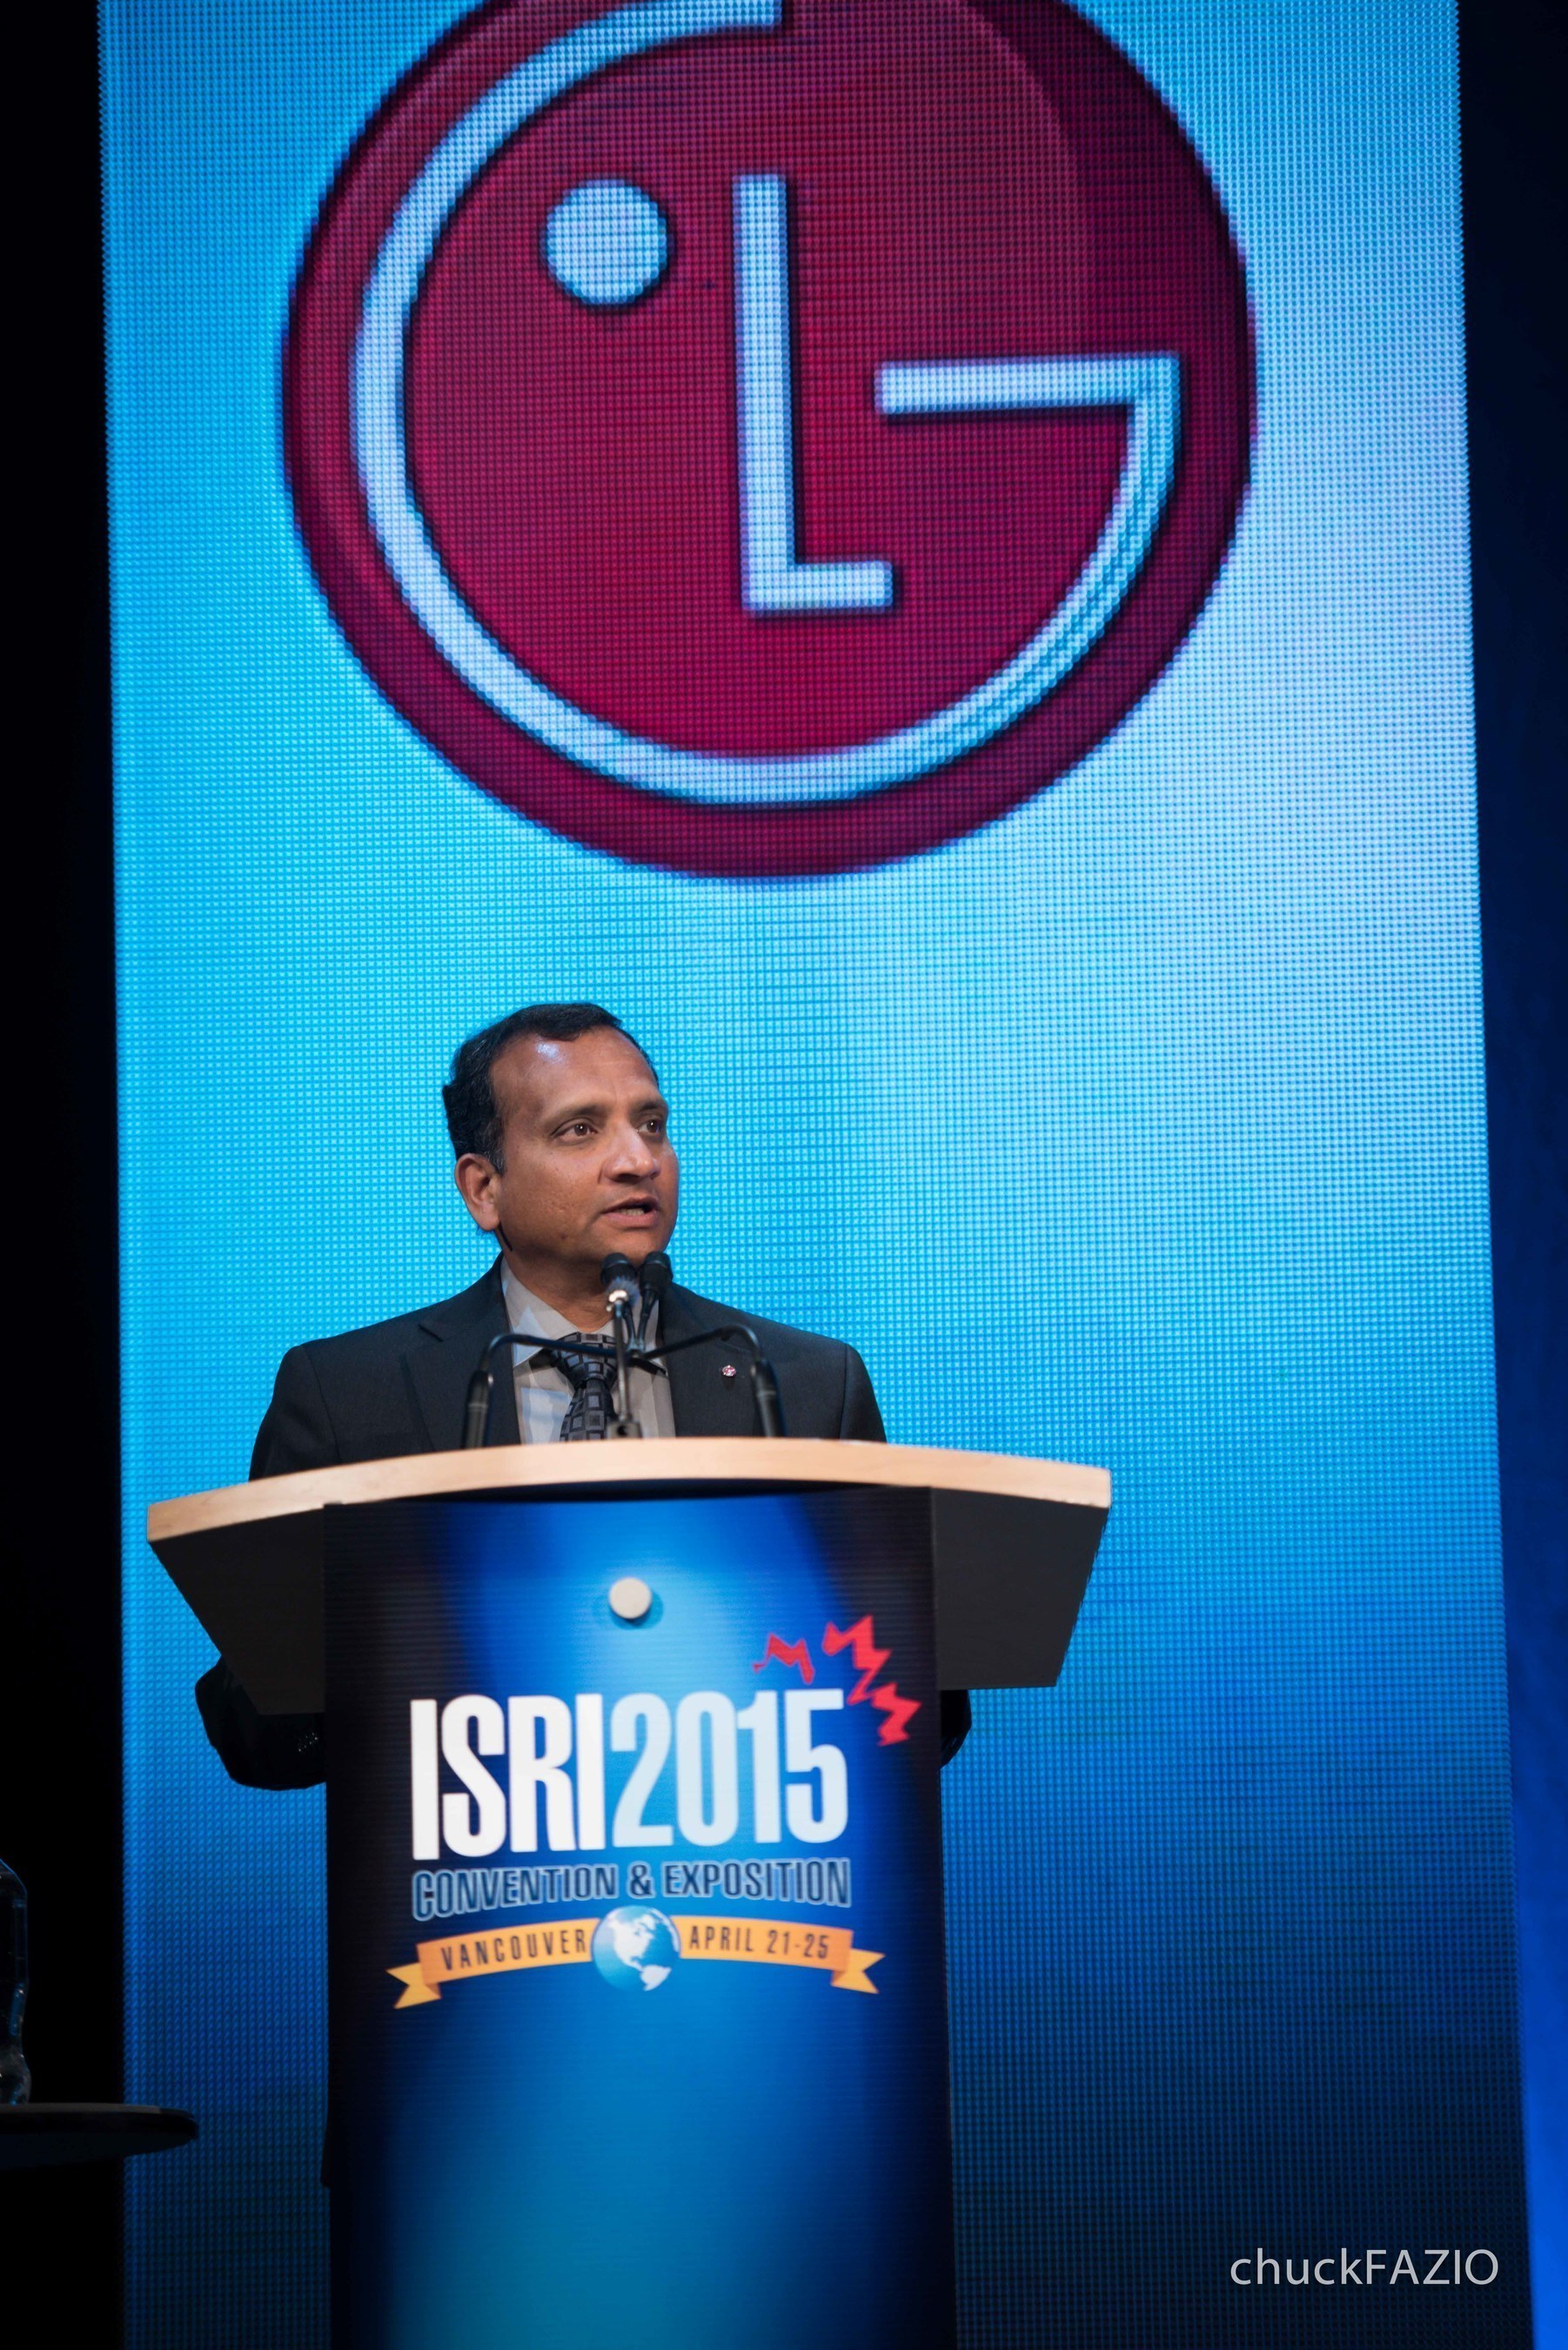 Dr. Nandhu Nandakumar, senior vice president, LG Technology Center of America, accepts the 2015  ISRI Design for Recycling(R) Award presented to LG Electronics for lifecycle designs of LG's OLED and 4K Ultra HD TVs.